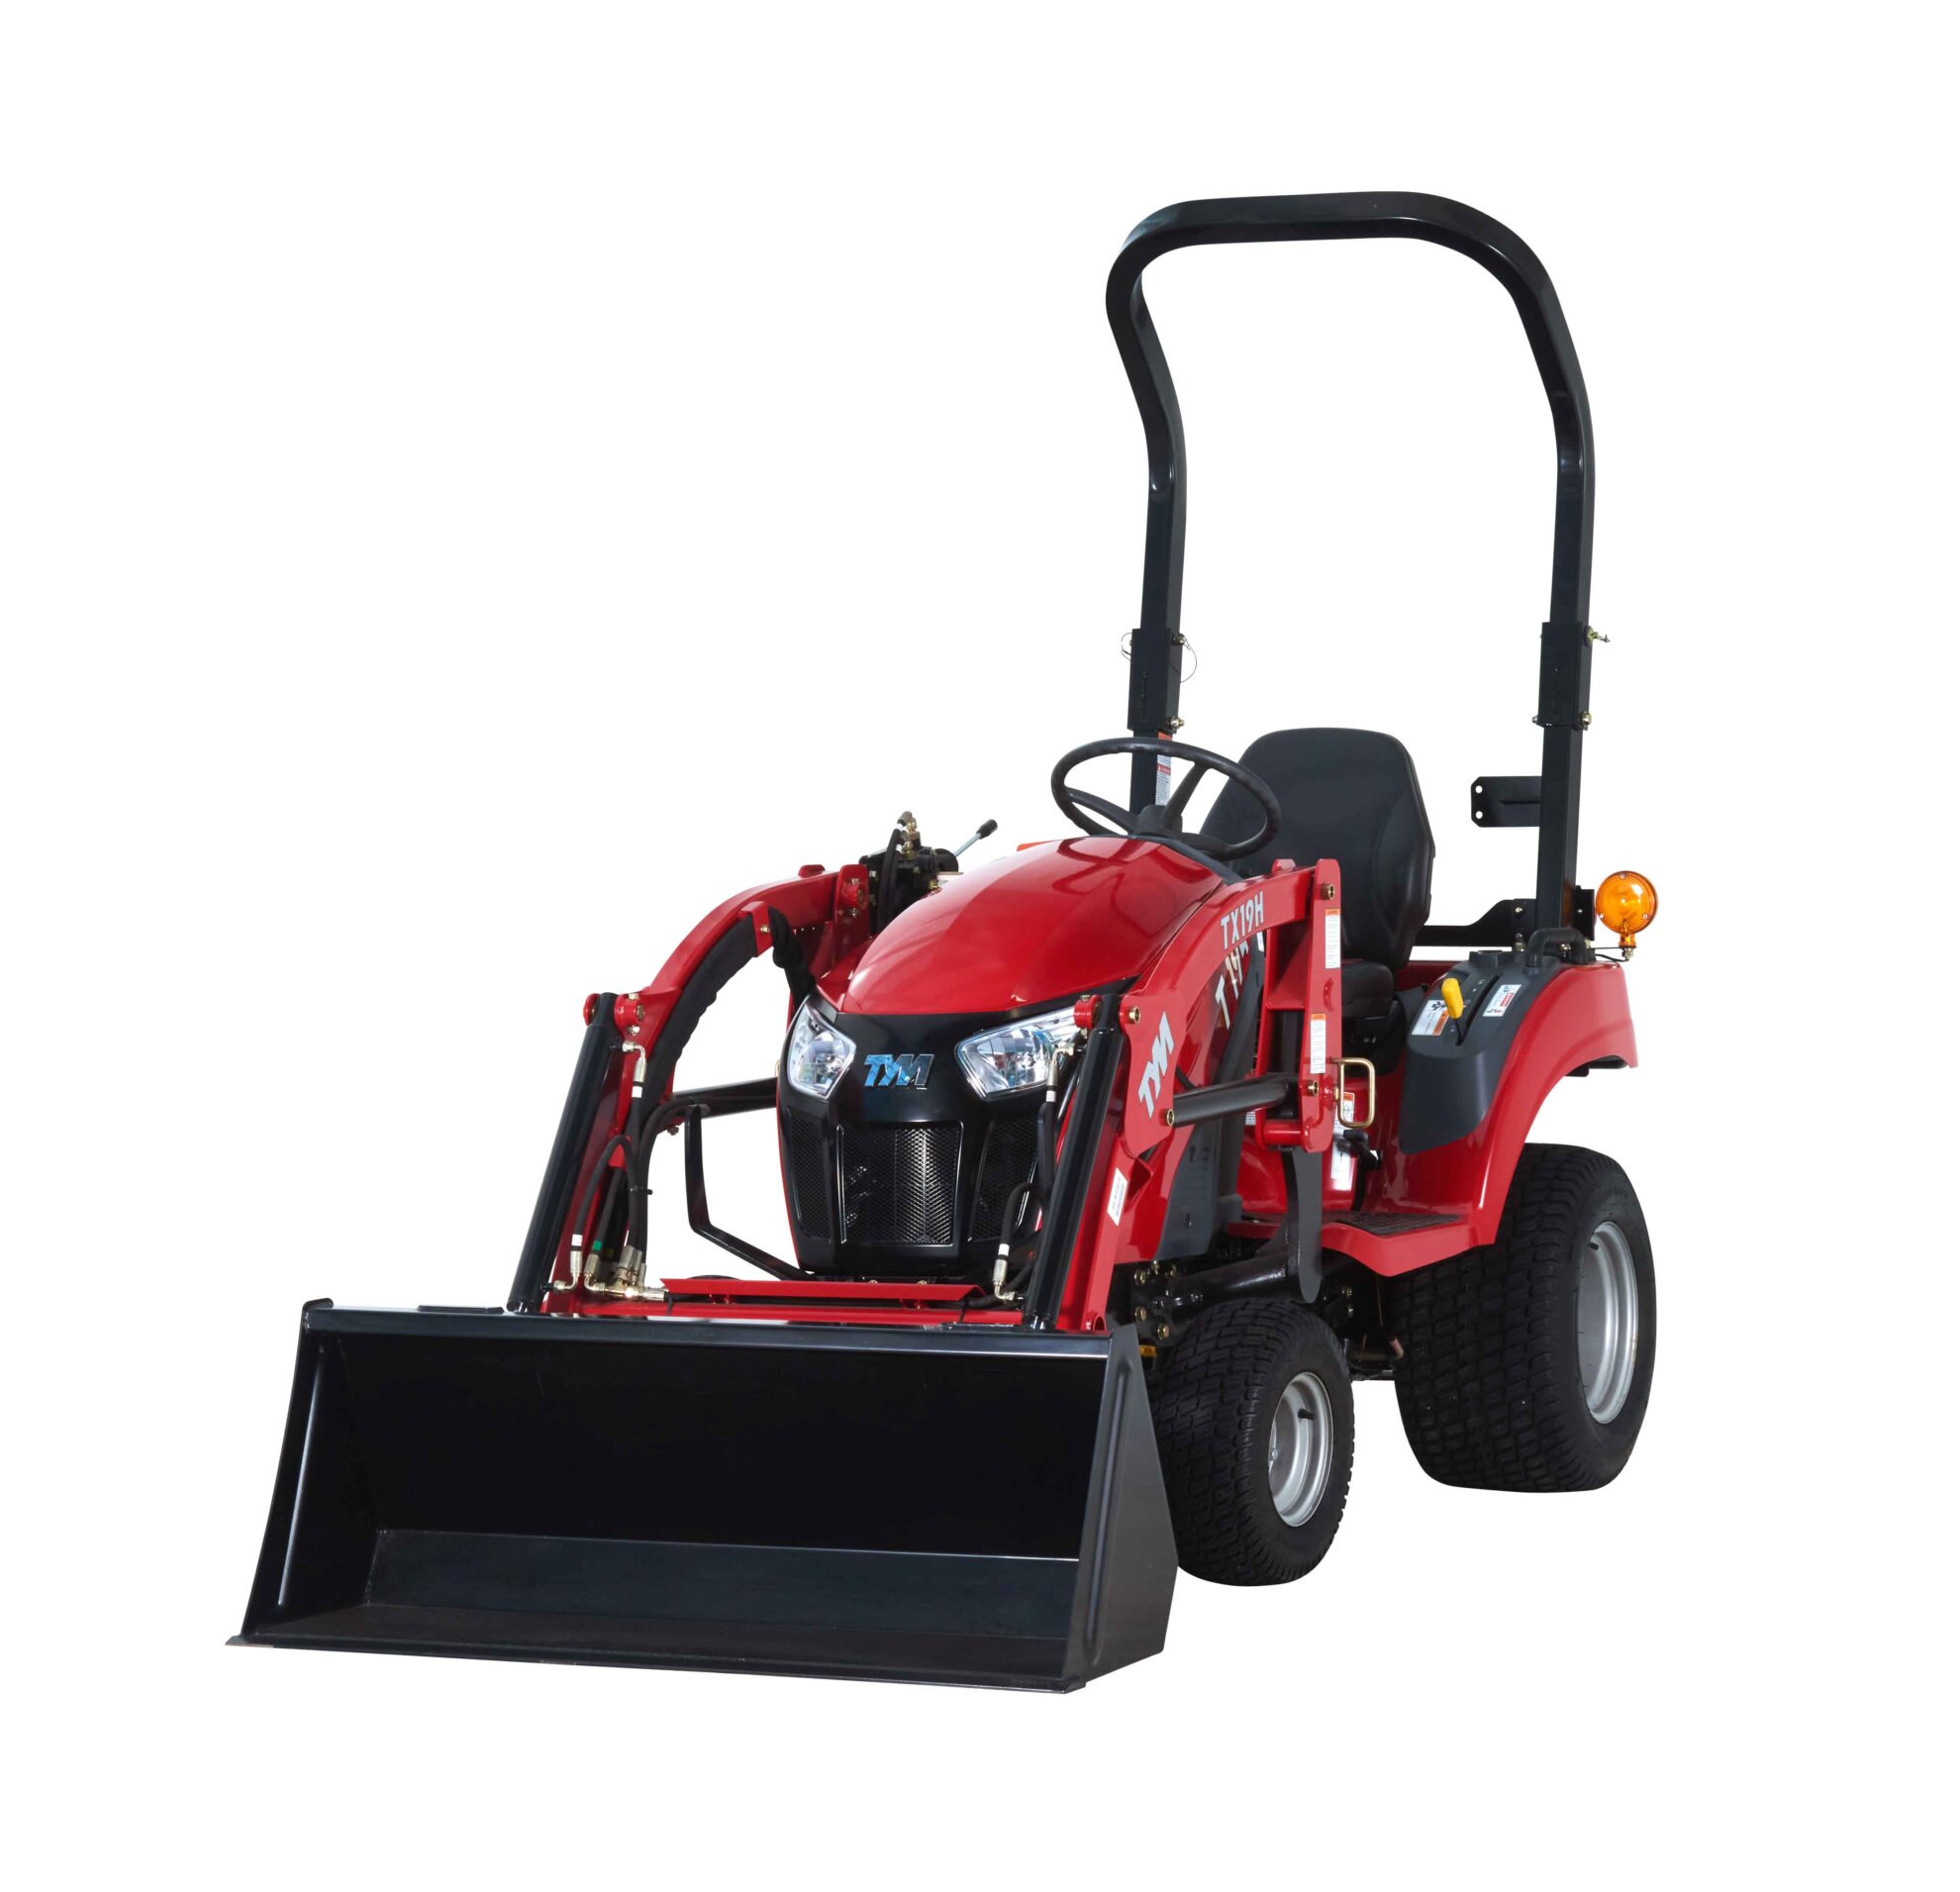 Tym sub-compact tractor model T194 (Hydr. drive)